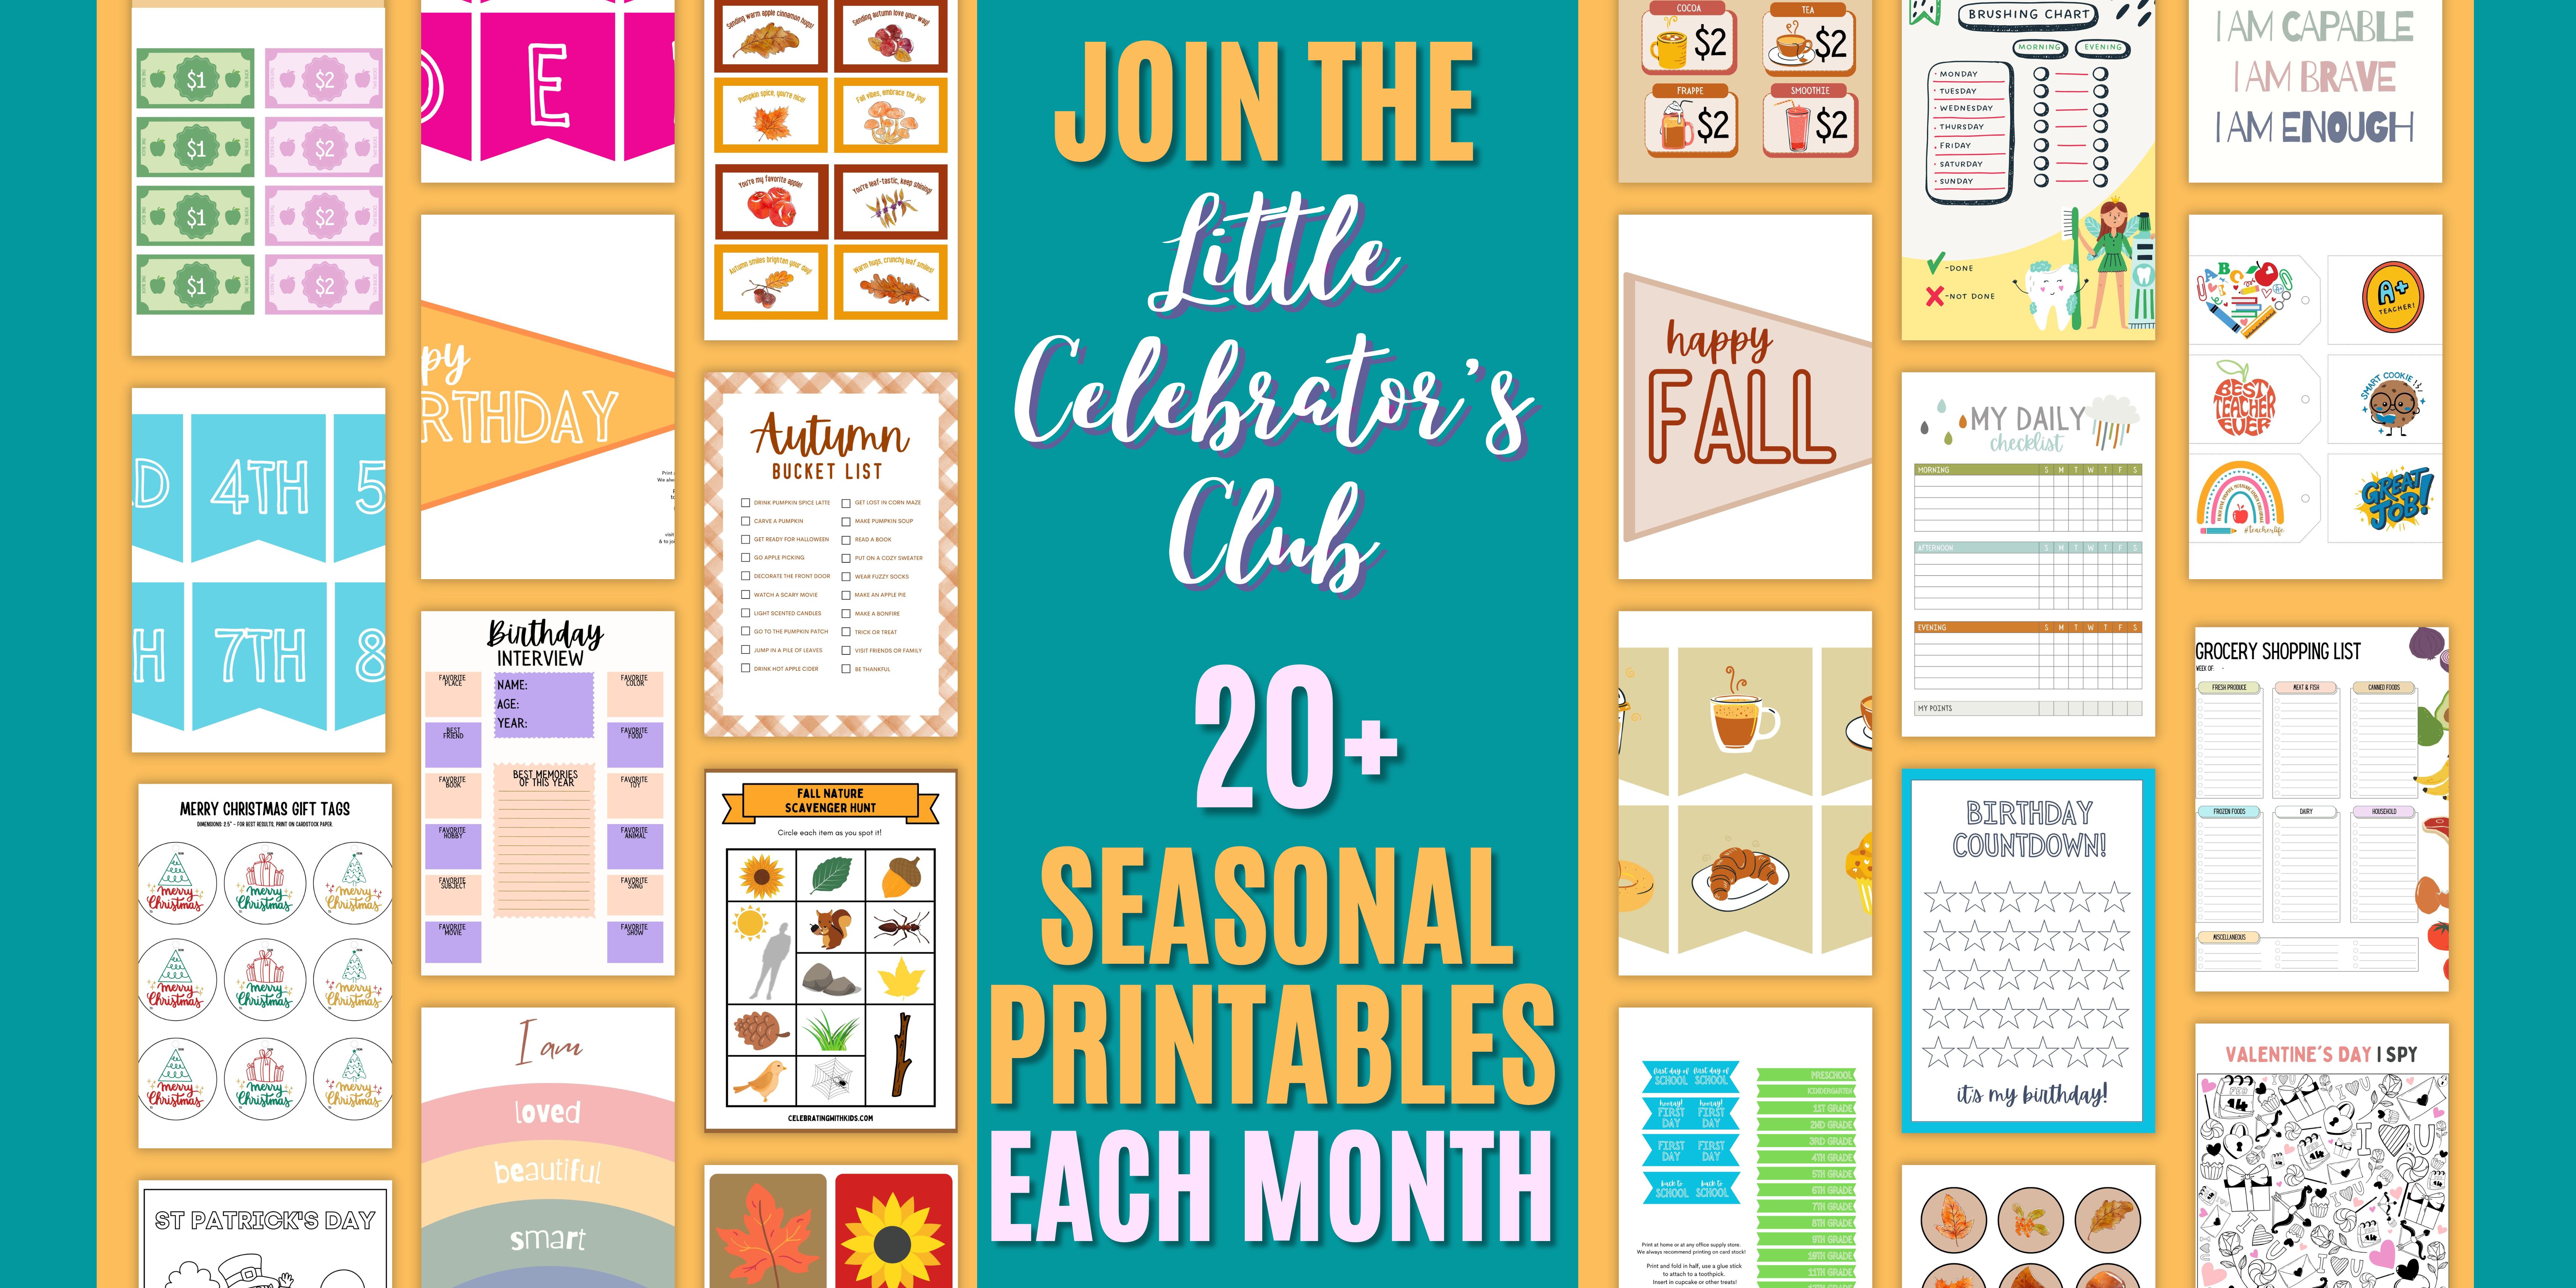 join the little celebrator's club banner ad